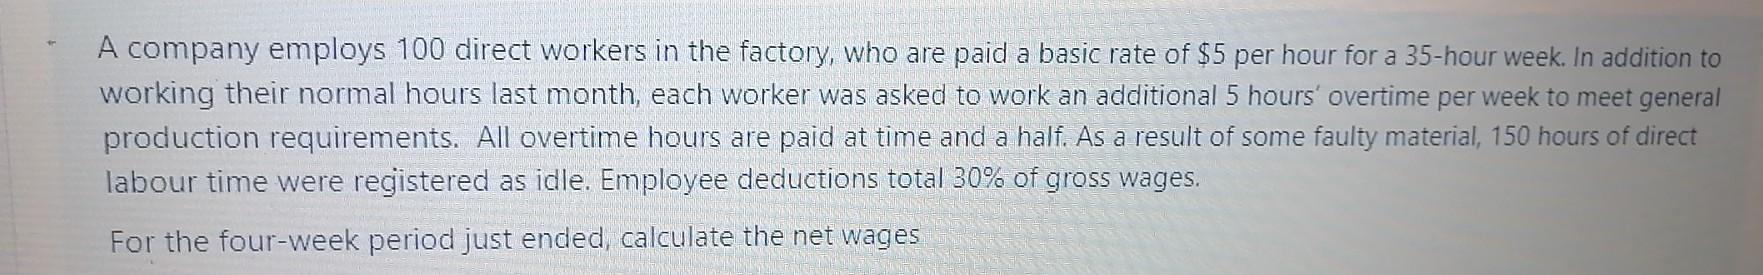 A company employs 100 direct workers in the factory, who are paid a basic rate of $5 per hour for a 35-hour week. In addition